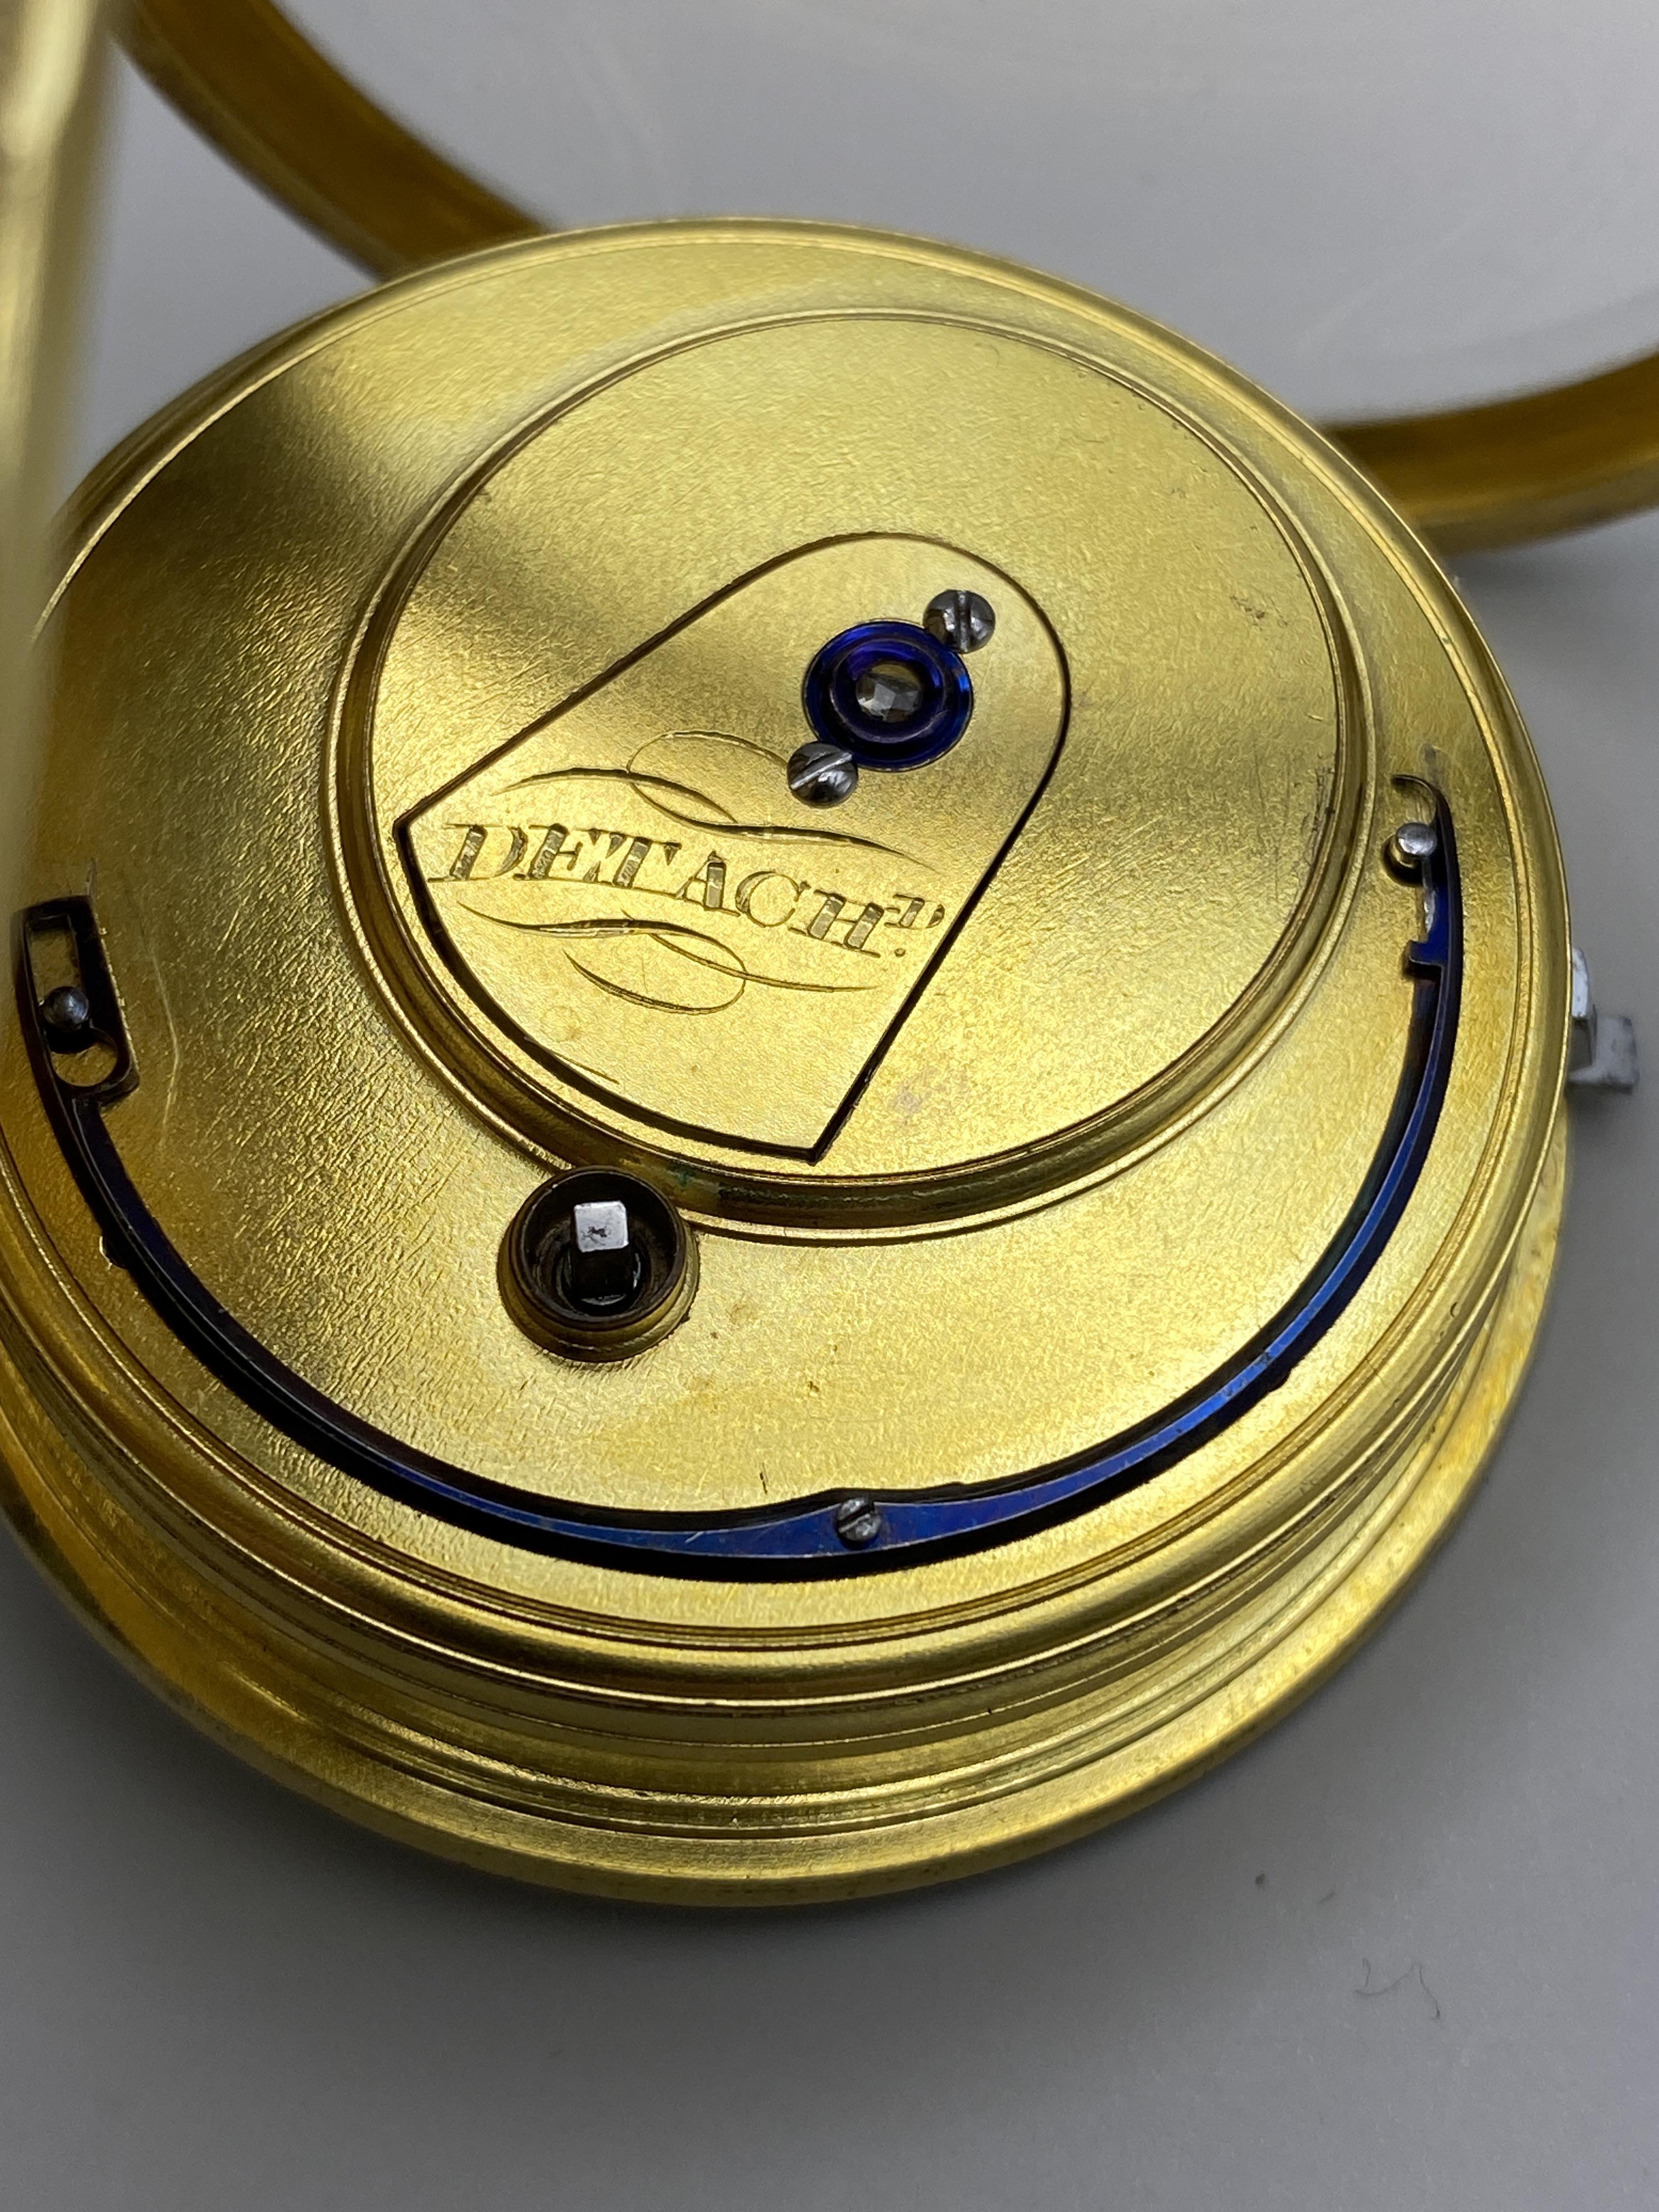 18ct Gold Fusee Pocket Watch by Gammon of Birmingham '1685', No.3584. - Image 23 of 48